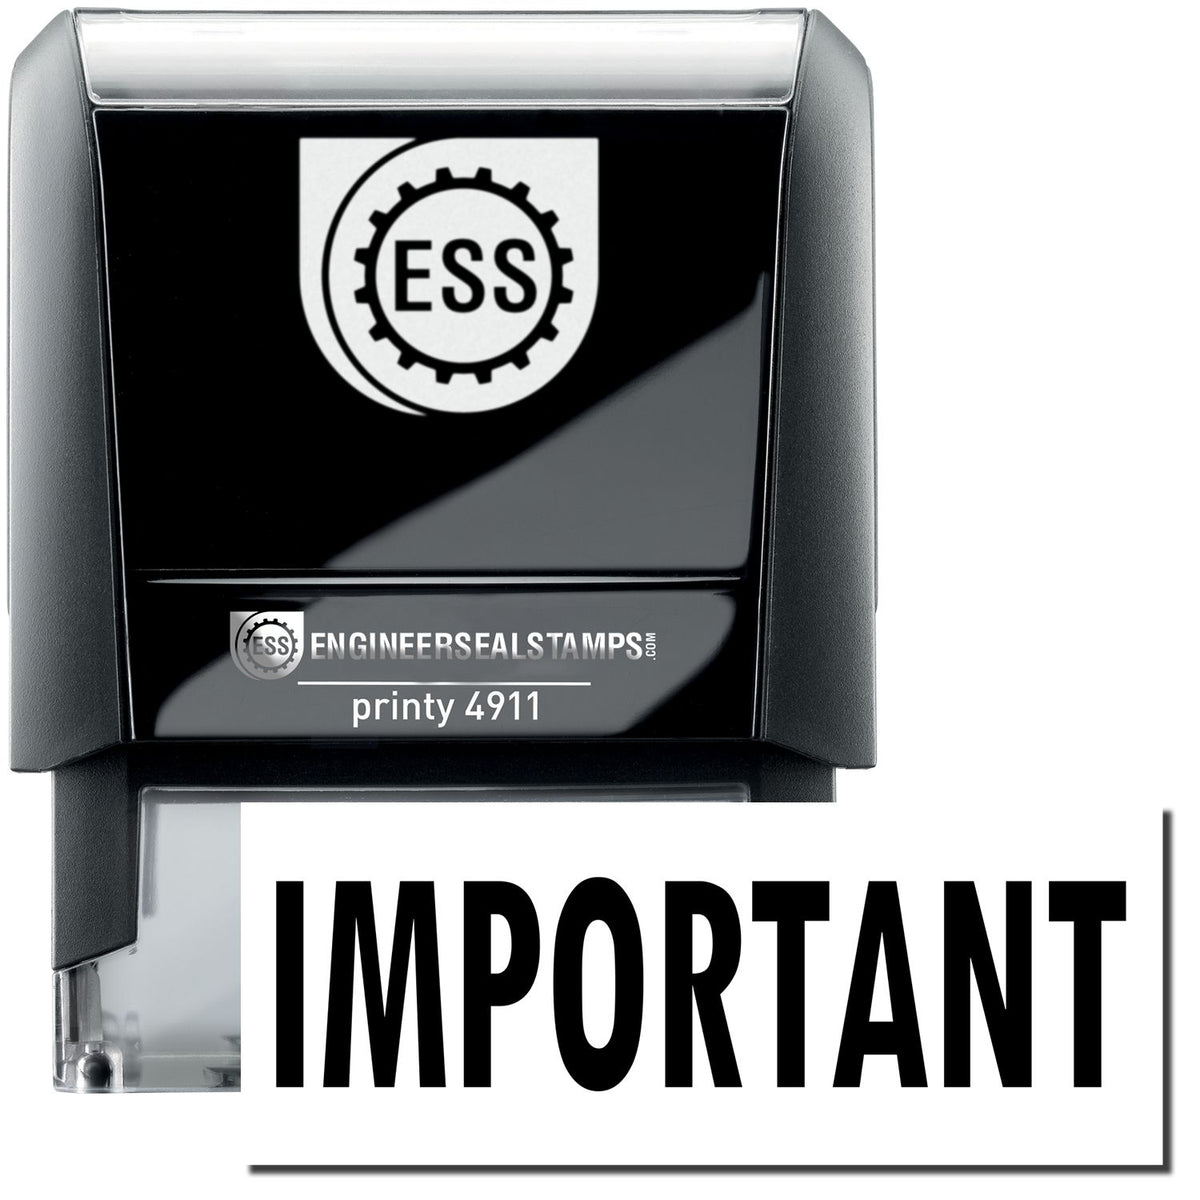 A self-inking stamp with a stamped image showing how the text &quot;IMPORTANT&quot; is displayed after stamping.